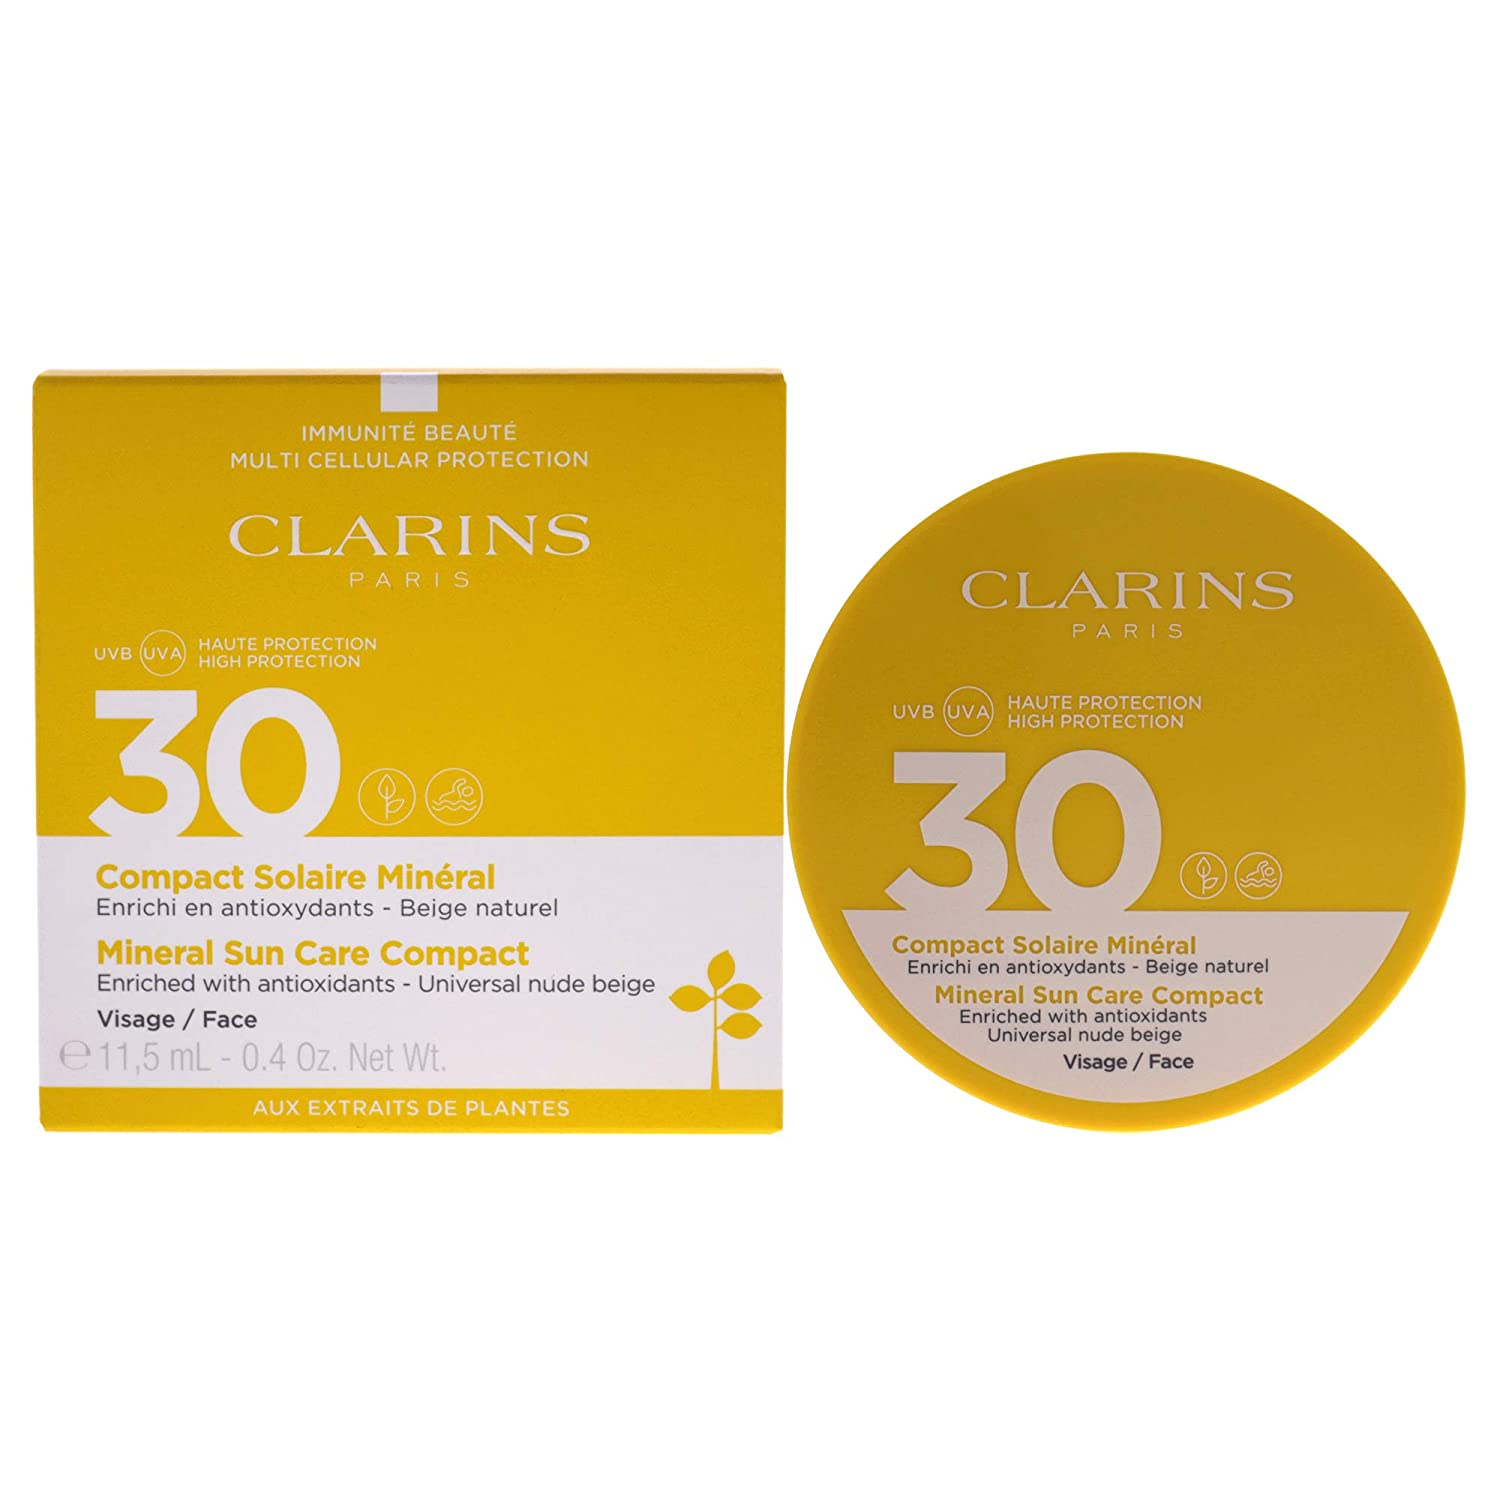 Clarins Supplement in medication, remedies and dietary supplements, pack of 1 (1 x 100 g)